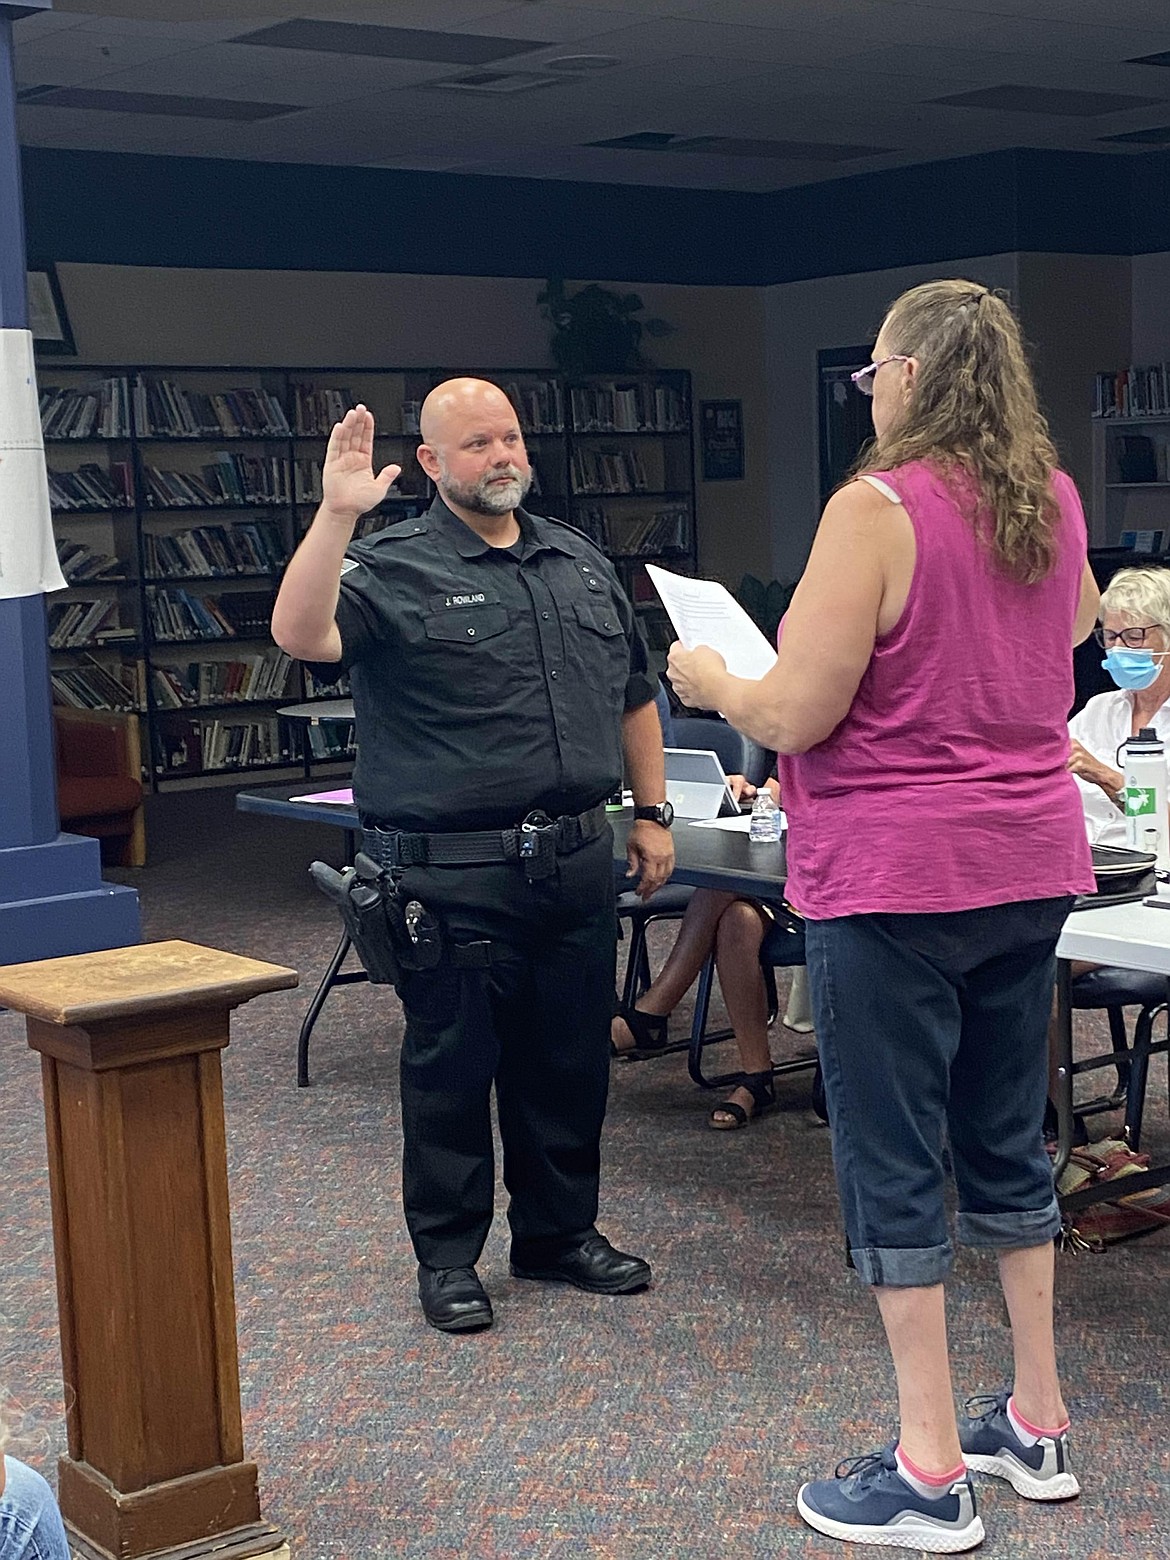 Justin Rowland takes the oath of office to be a full-time police officer for the Soap Lake Police Department with Soap Lake Mayor Michelle Agliano.